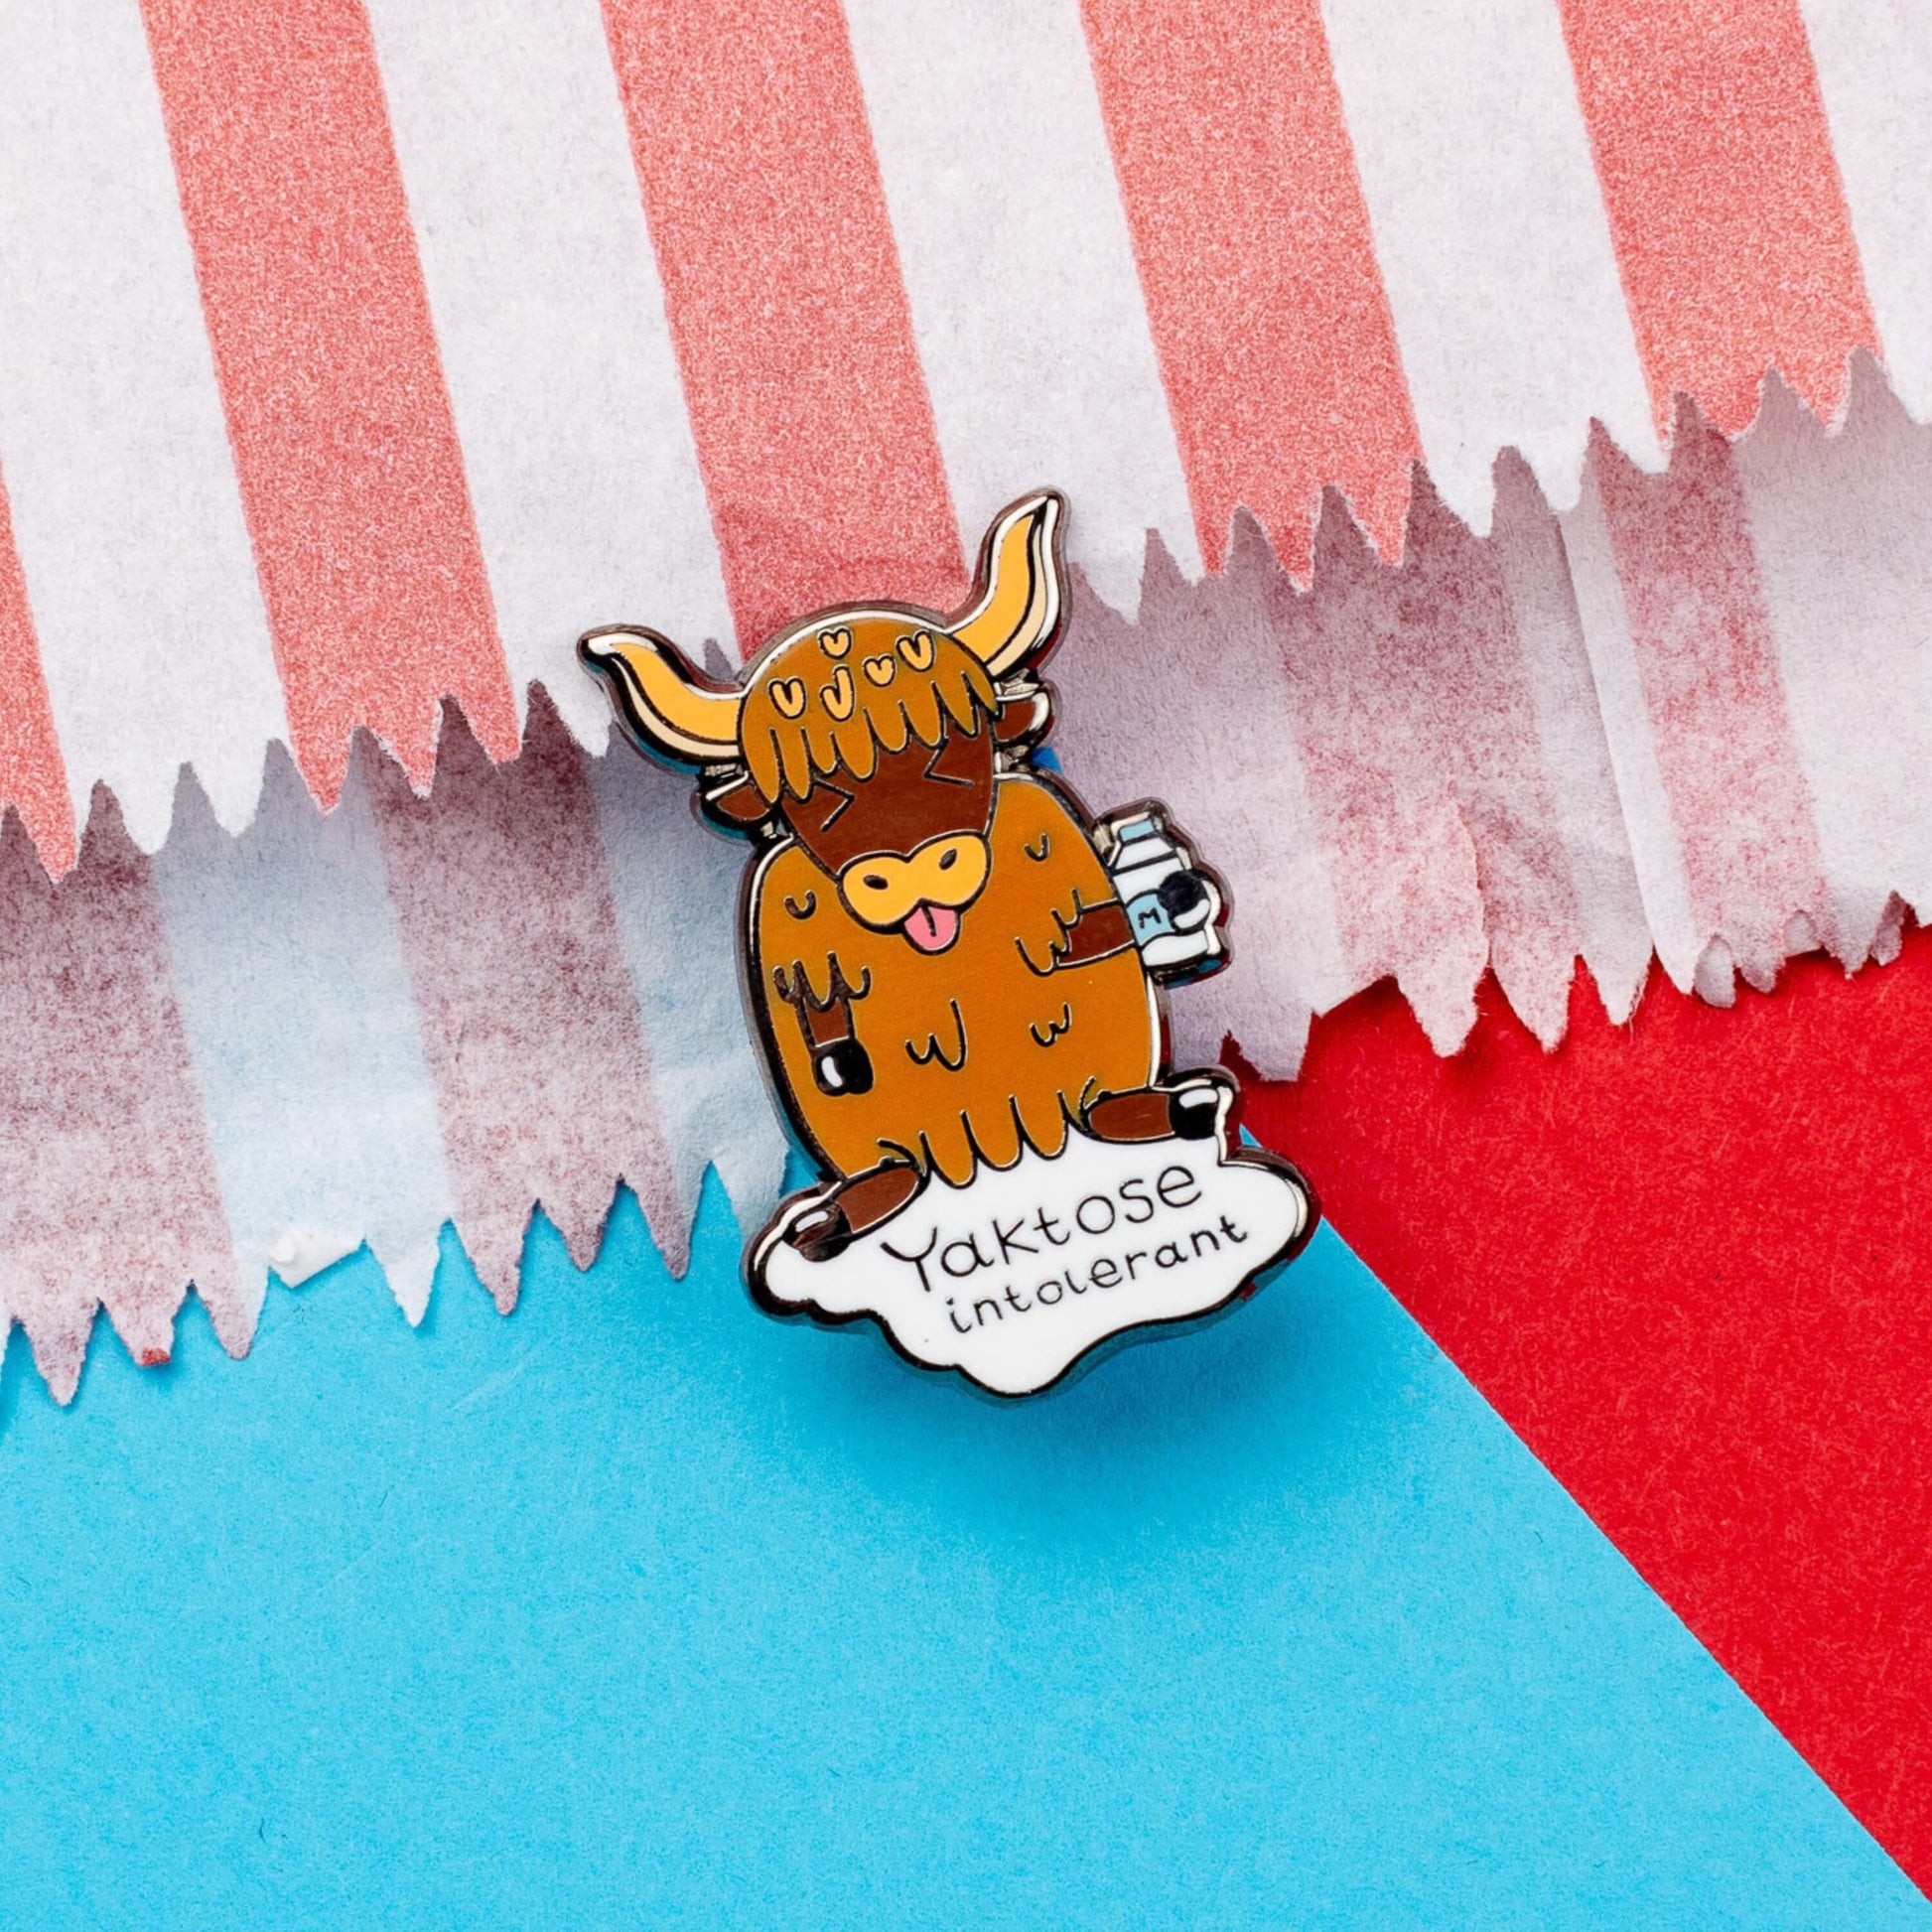 Yaktose Intolerant Enamel Pin - Lactose Intolerant on a blue and red background. The enamel pin is a yak sat holding a bottle of milk with it's tongue out looking disgusted. There is a puddle of milk under the yak with black text that reads 'yaktose intolerant'. The hand drawn design is made to raise awareness for lactose intolerance.